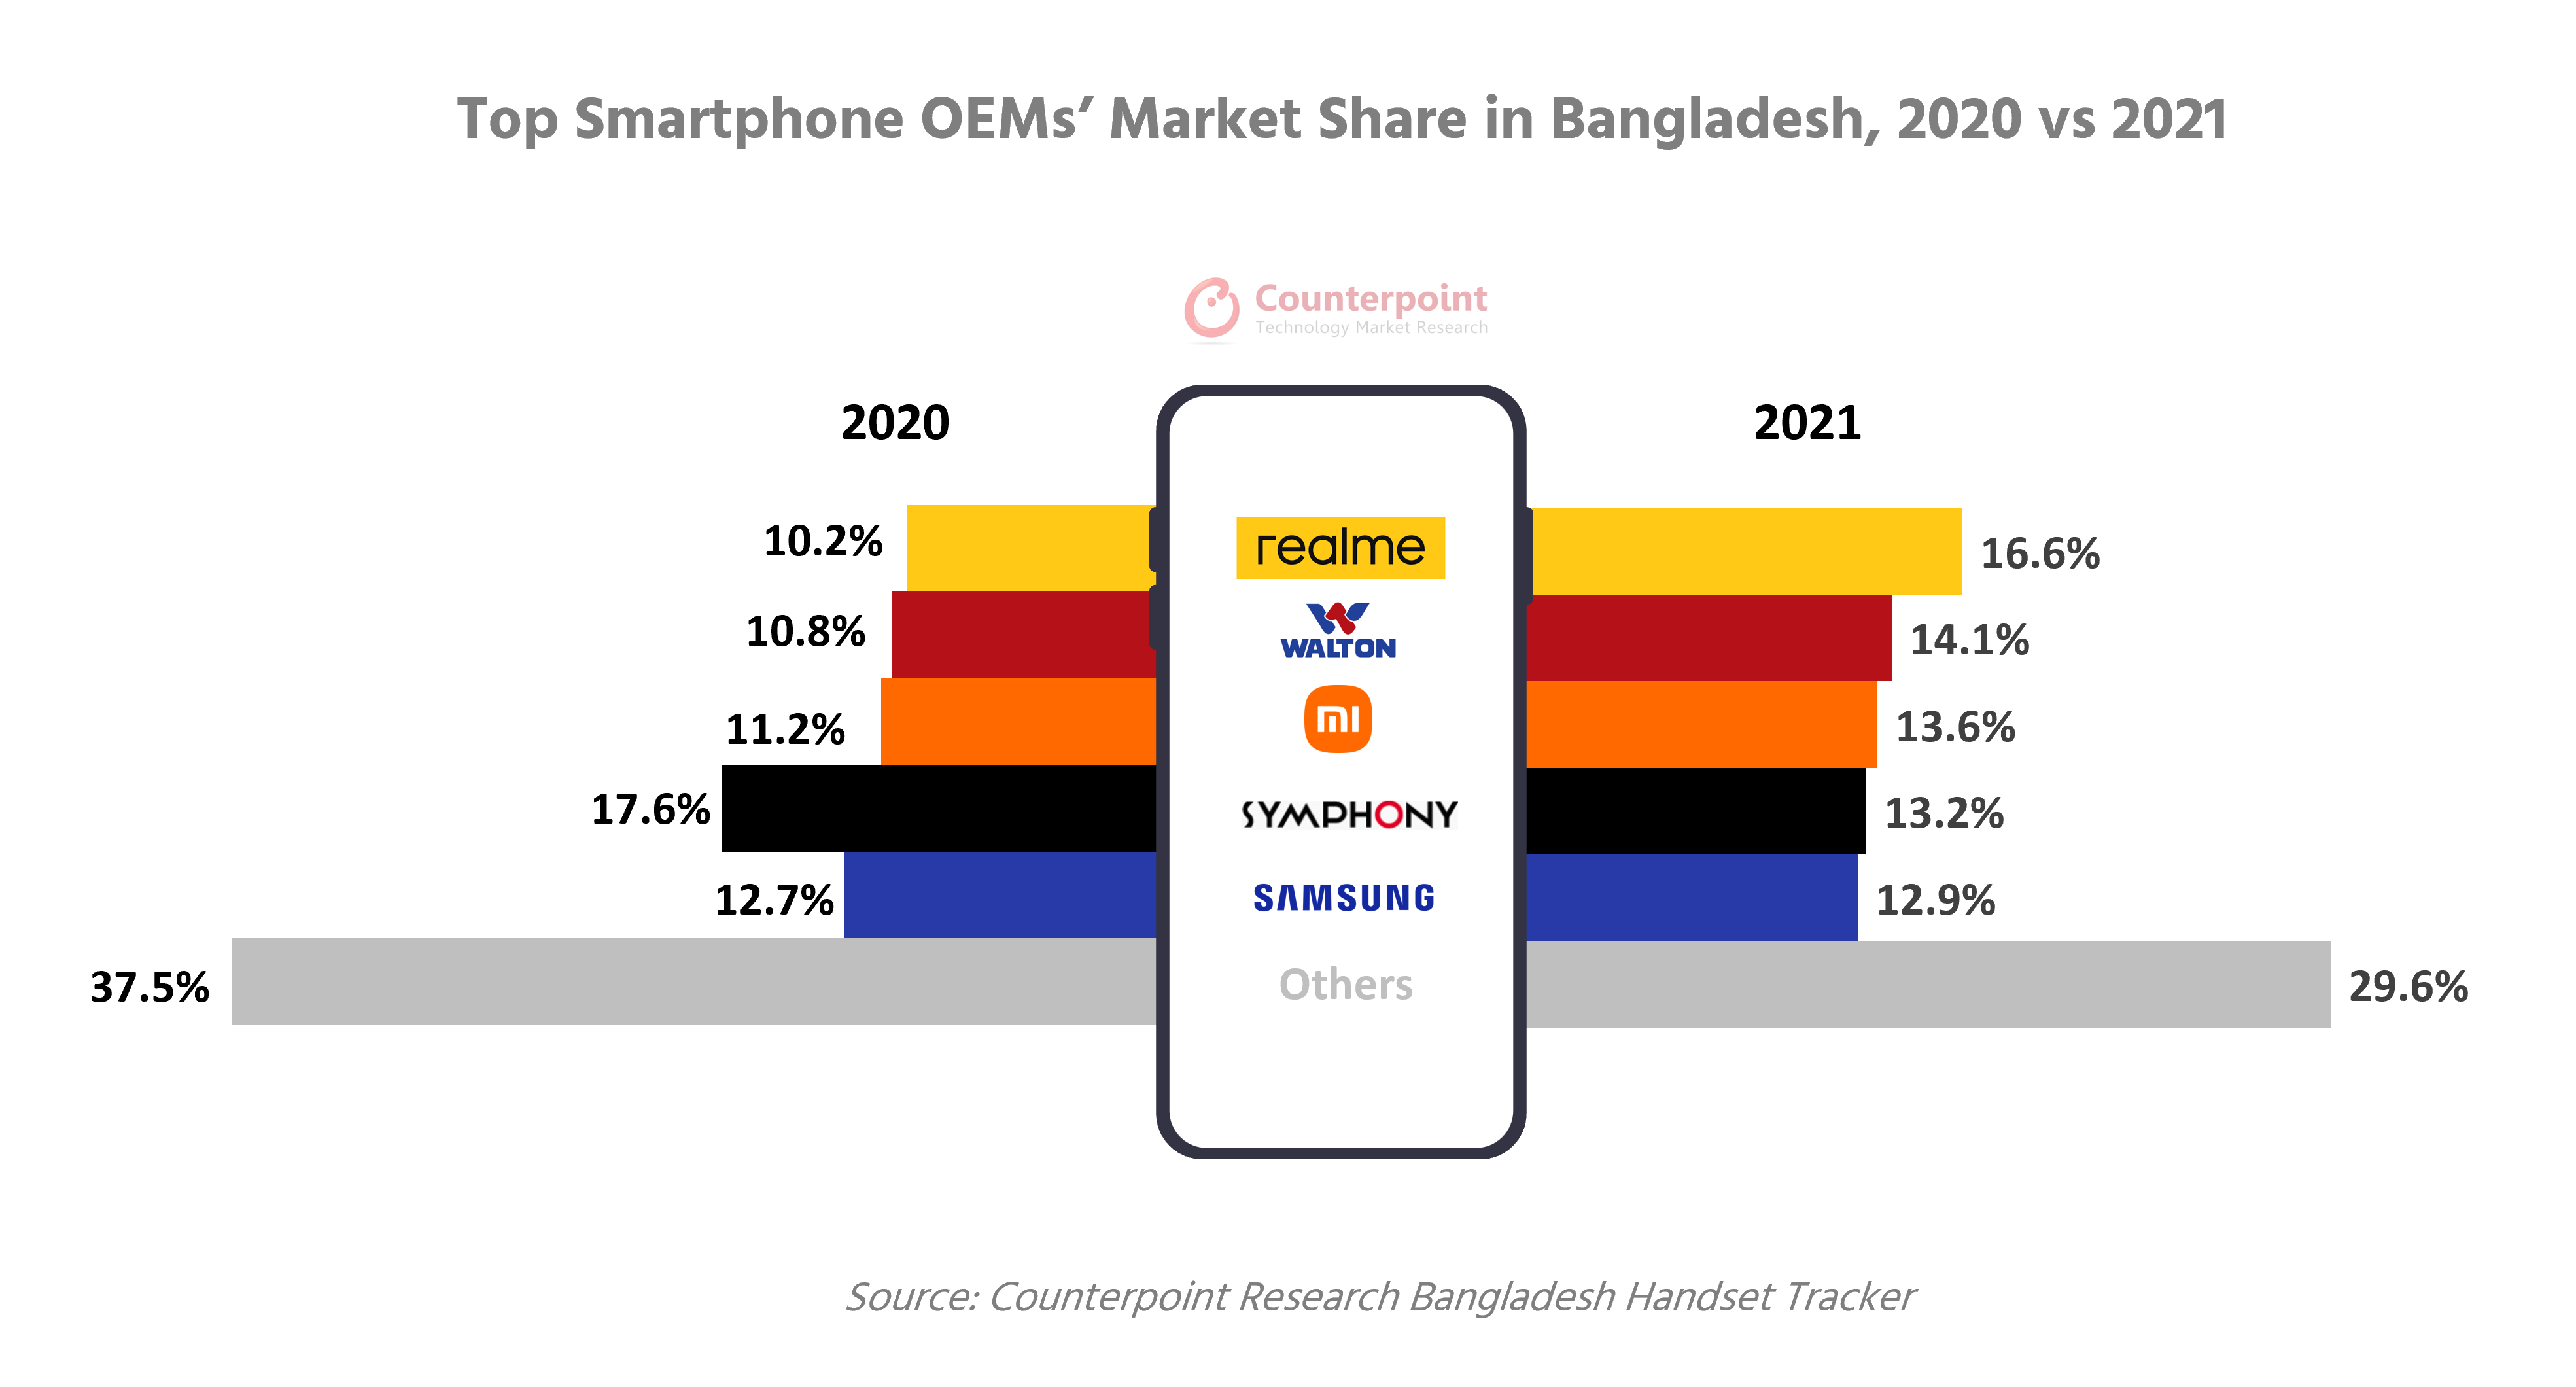 Counterpoint Research Top Smartphone OEMs, Market Share in Bangladesh, 202 vs 2021